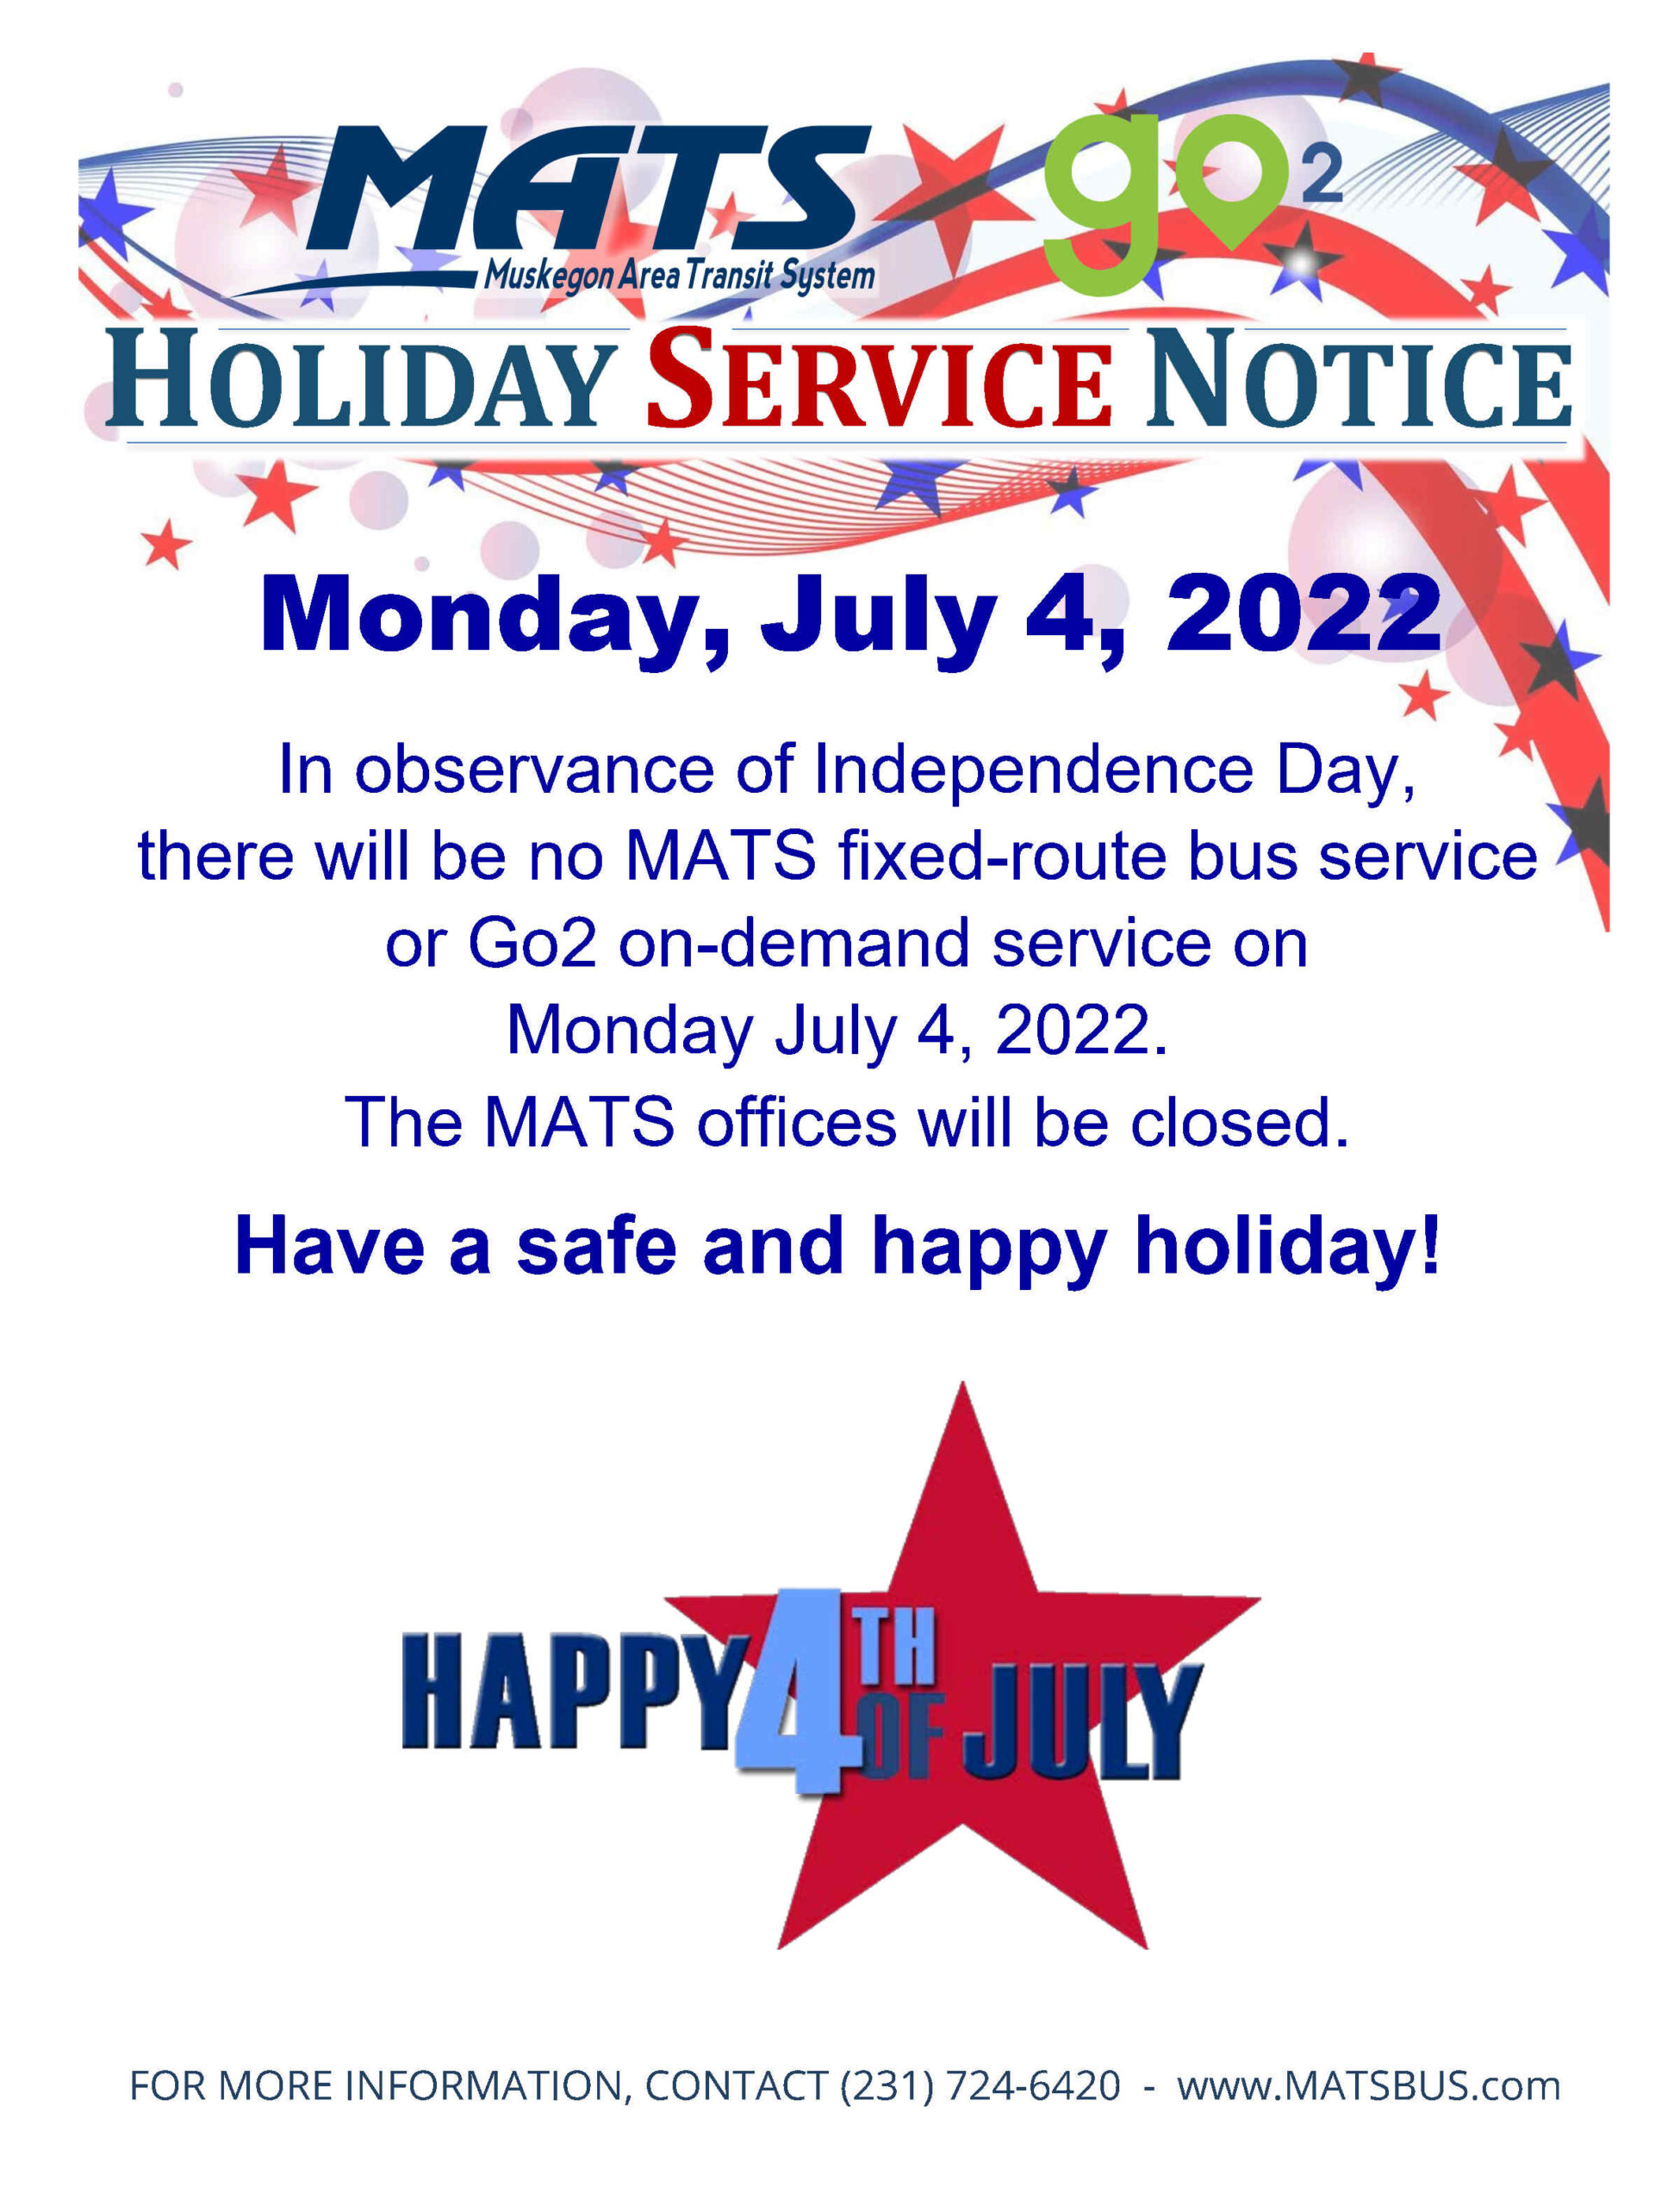 MATS and Go2 will be closed on Monday, July 4, 2022, in observance of Independence Day. Have a safe and happy holiday!